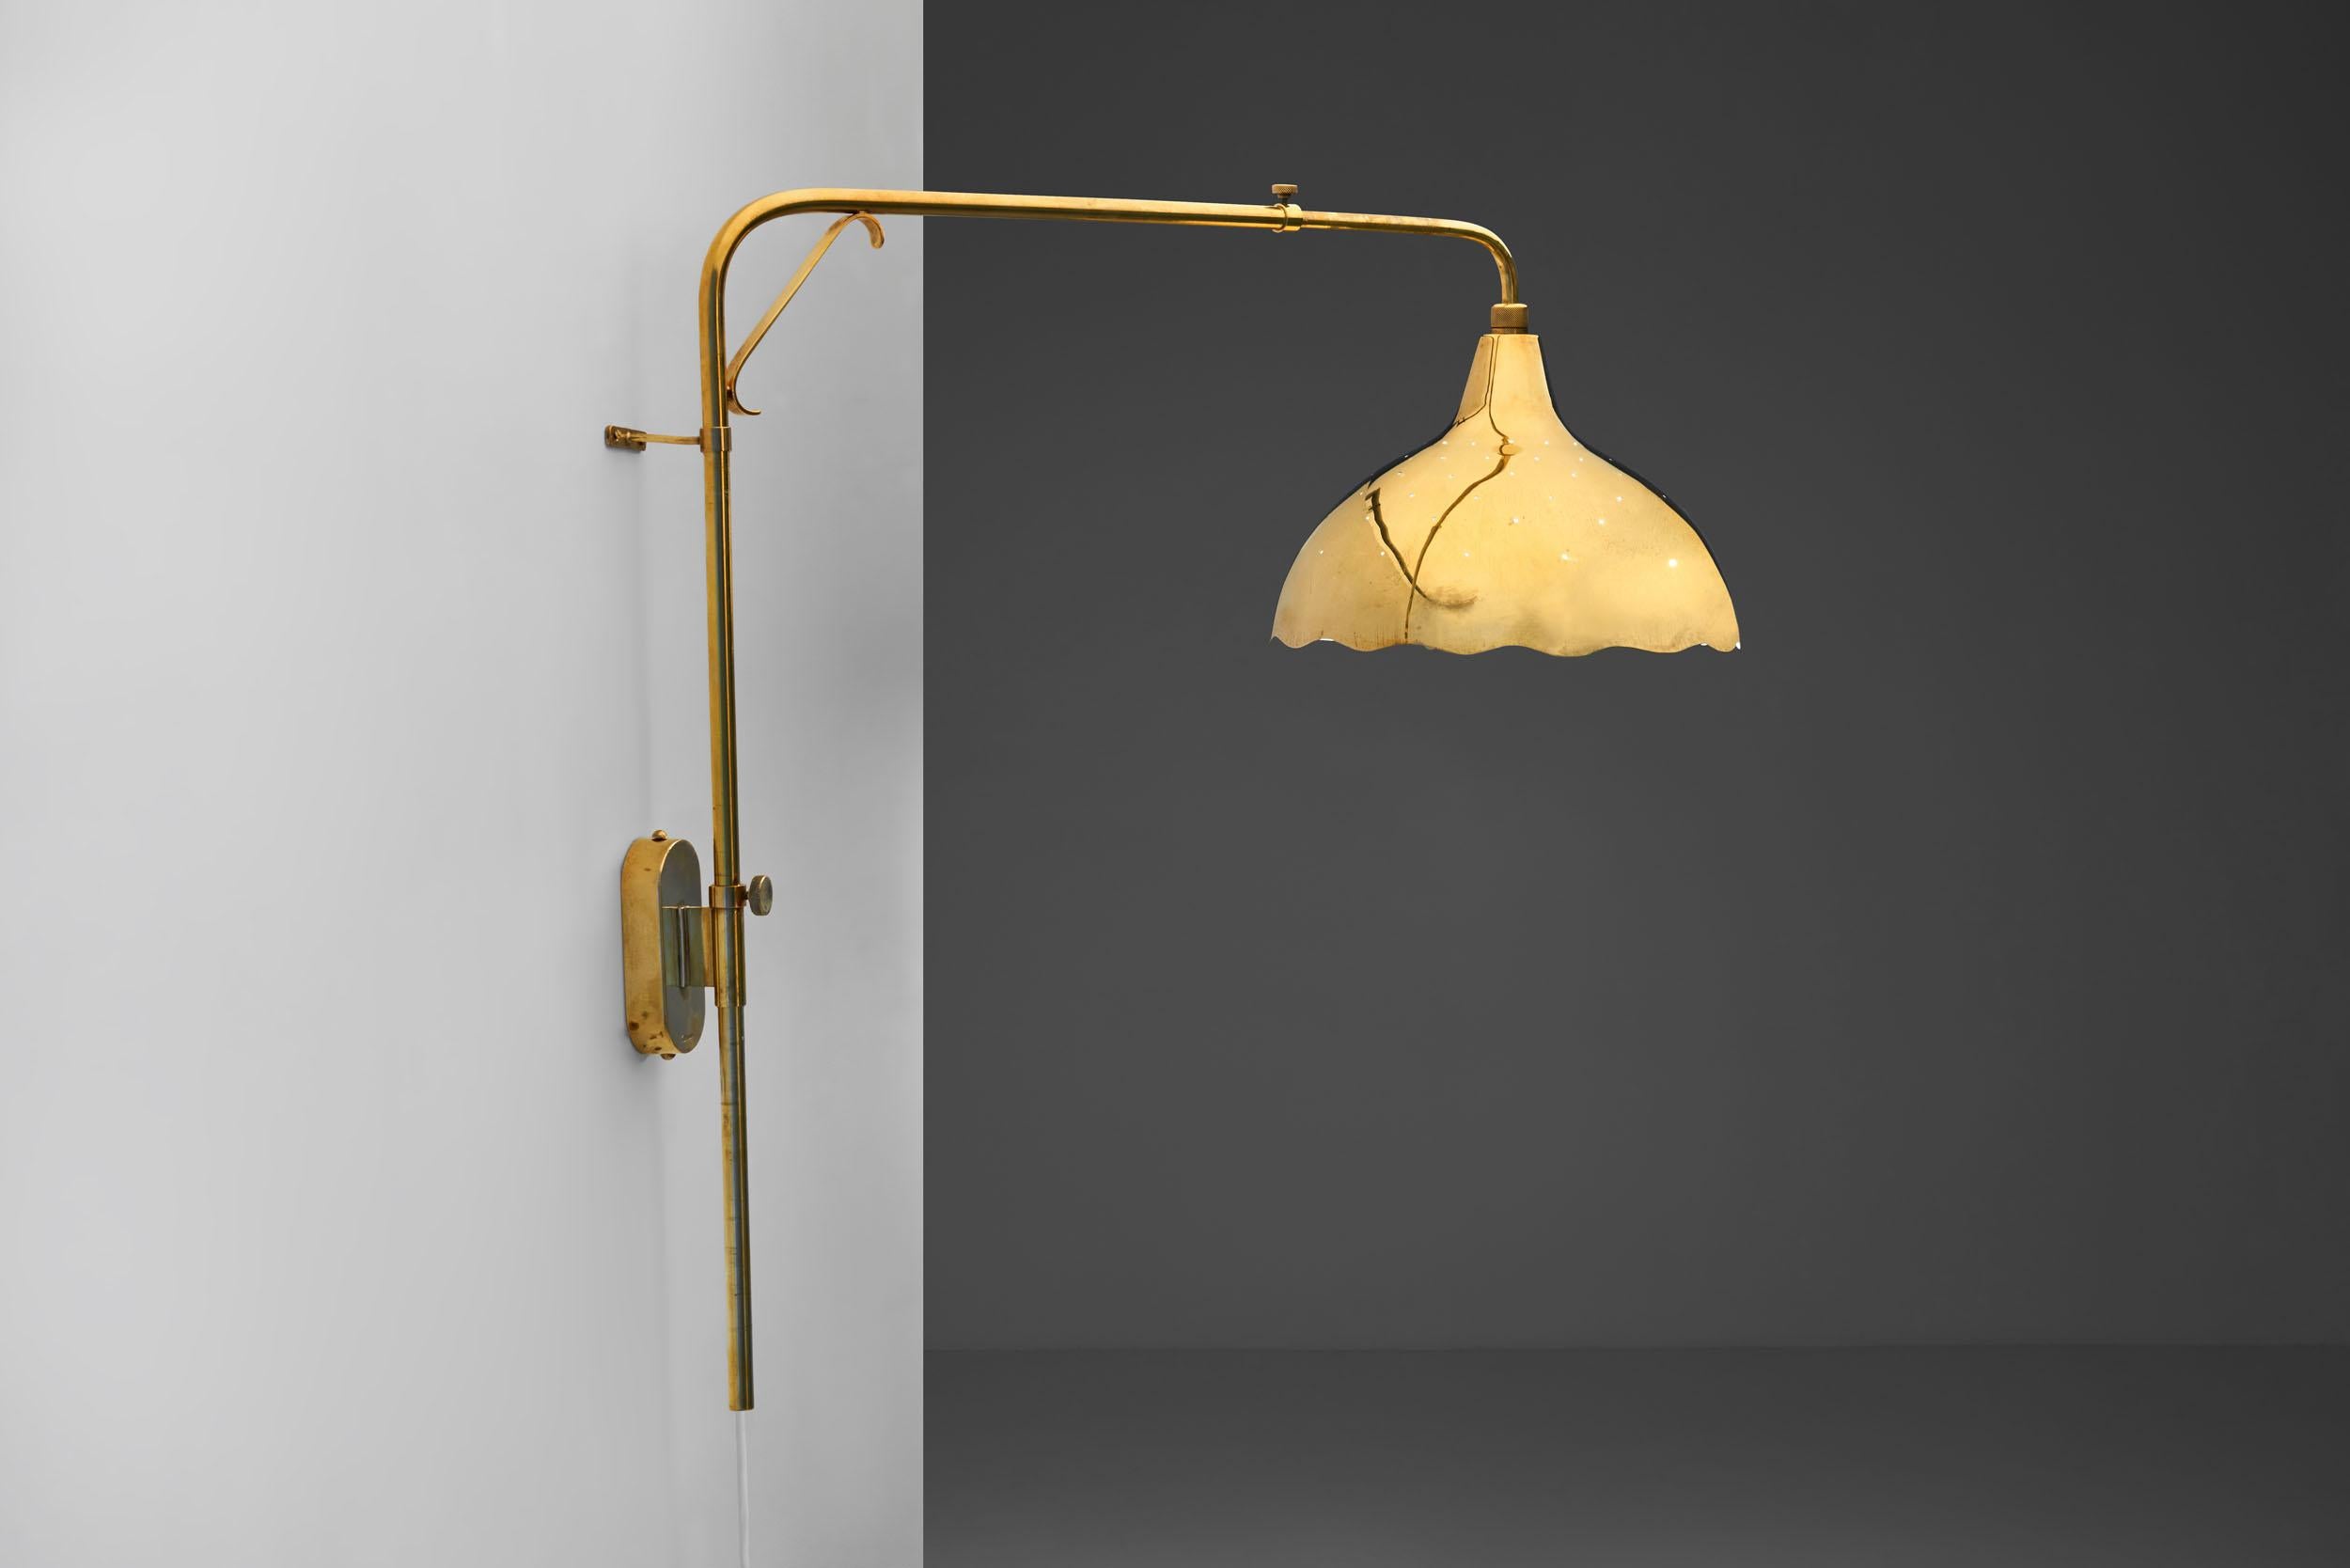 Mid-20th Century Wall Light by Gunnel Nyman for Idman Oy, Finland, 1940s